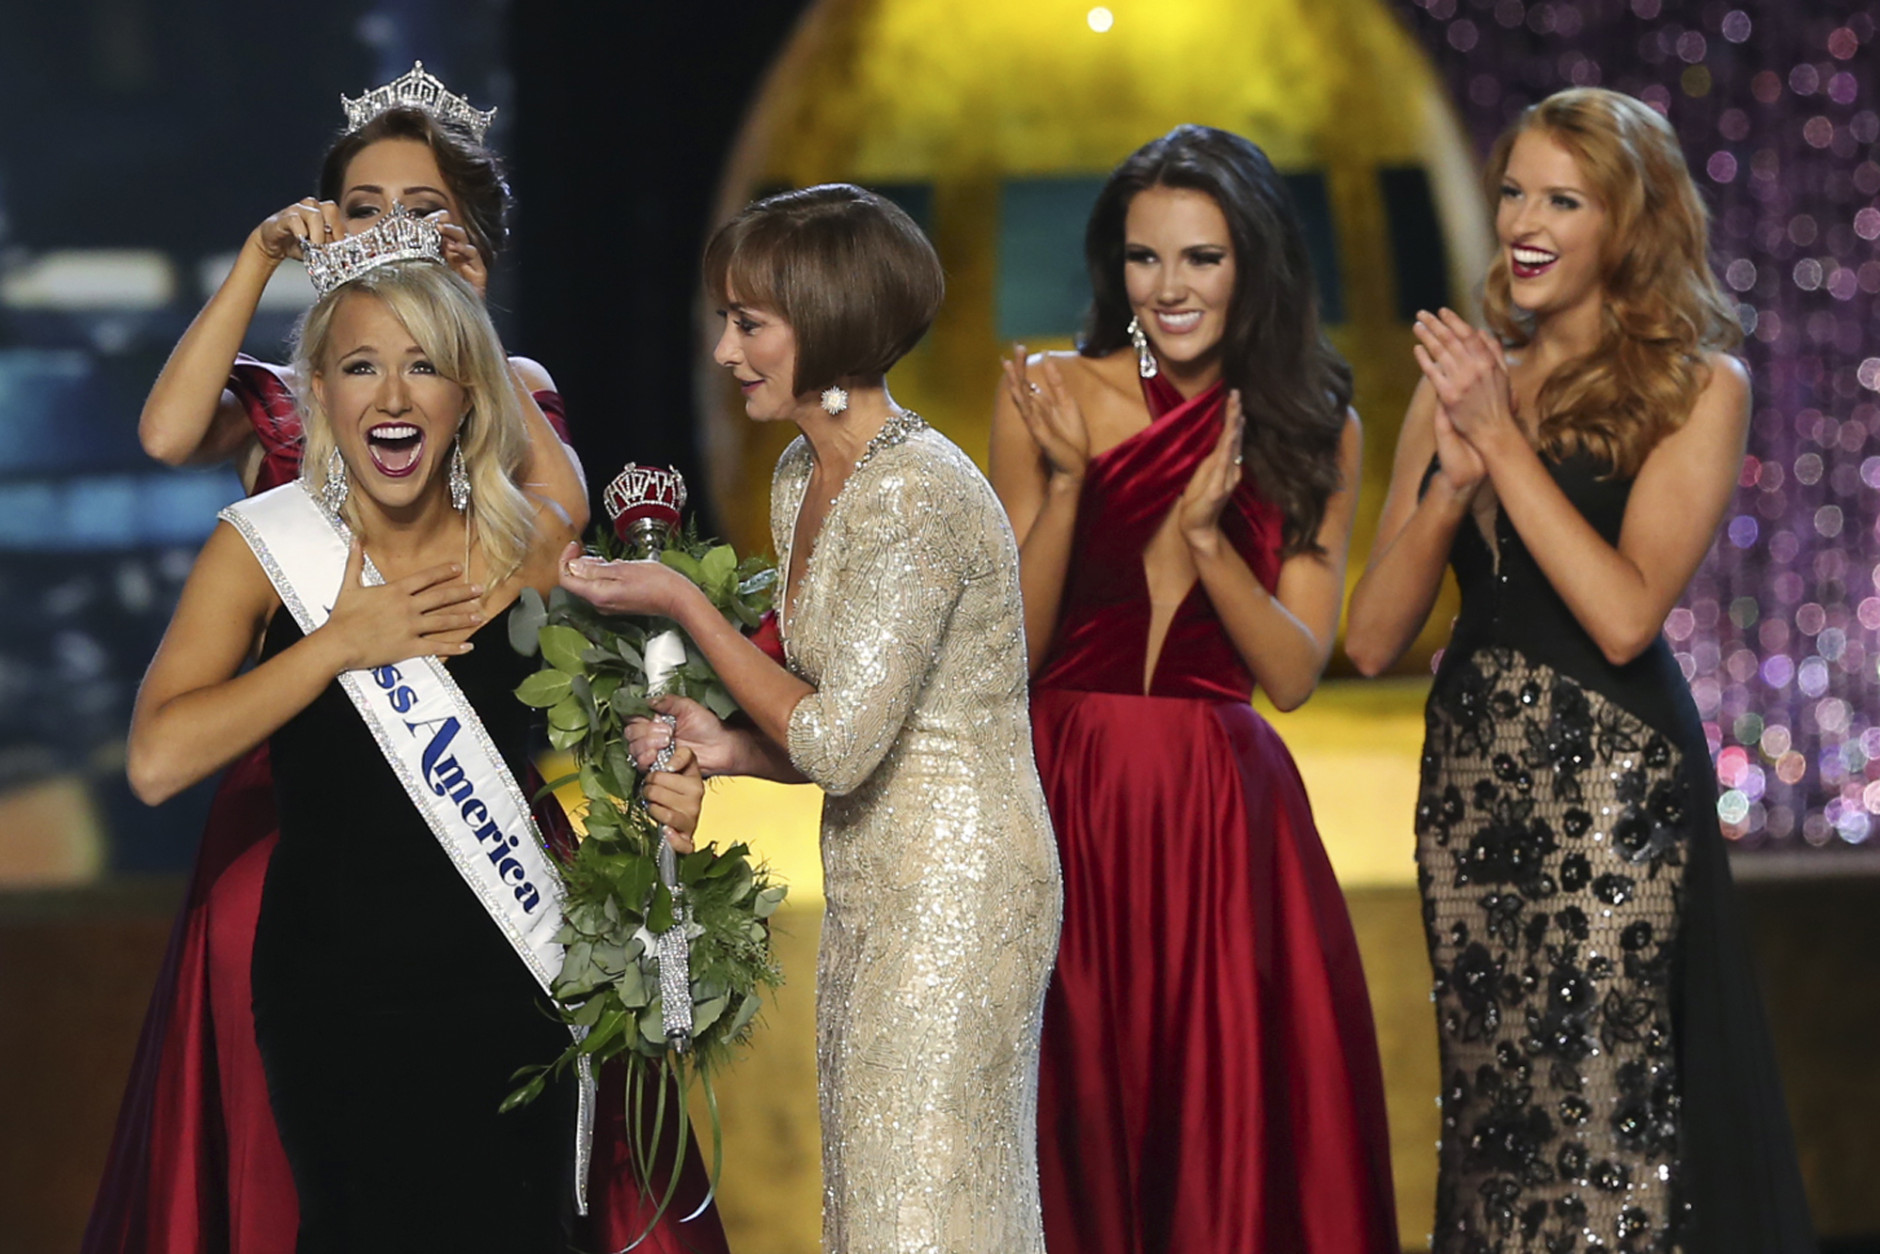 The outgoing Miss America, Betty Cantrell, back left, crowns the Miss America winner Miss Arkansas Savvy Shields, while Lynn Weidner, third right, assists, as Miss Maryland Hannah Brewer, second right, and Miss Texas 2016 Caroline Carothers, look on during the Miss America 2017 pageant, Sunday, Sept. 11, 2016, in Atlantic City, N.J. (AP Photo/Mel Evans)